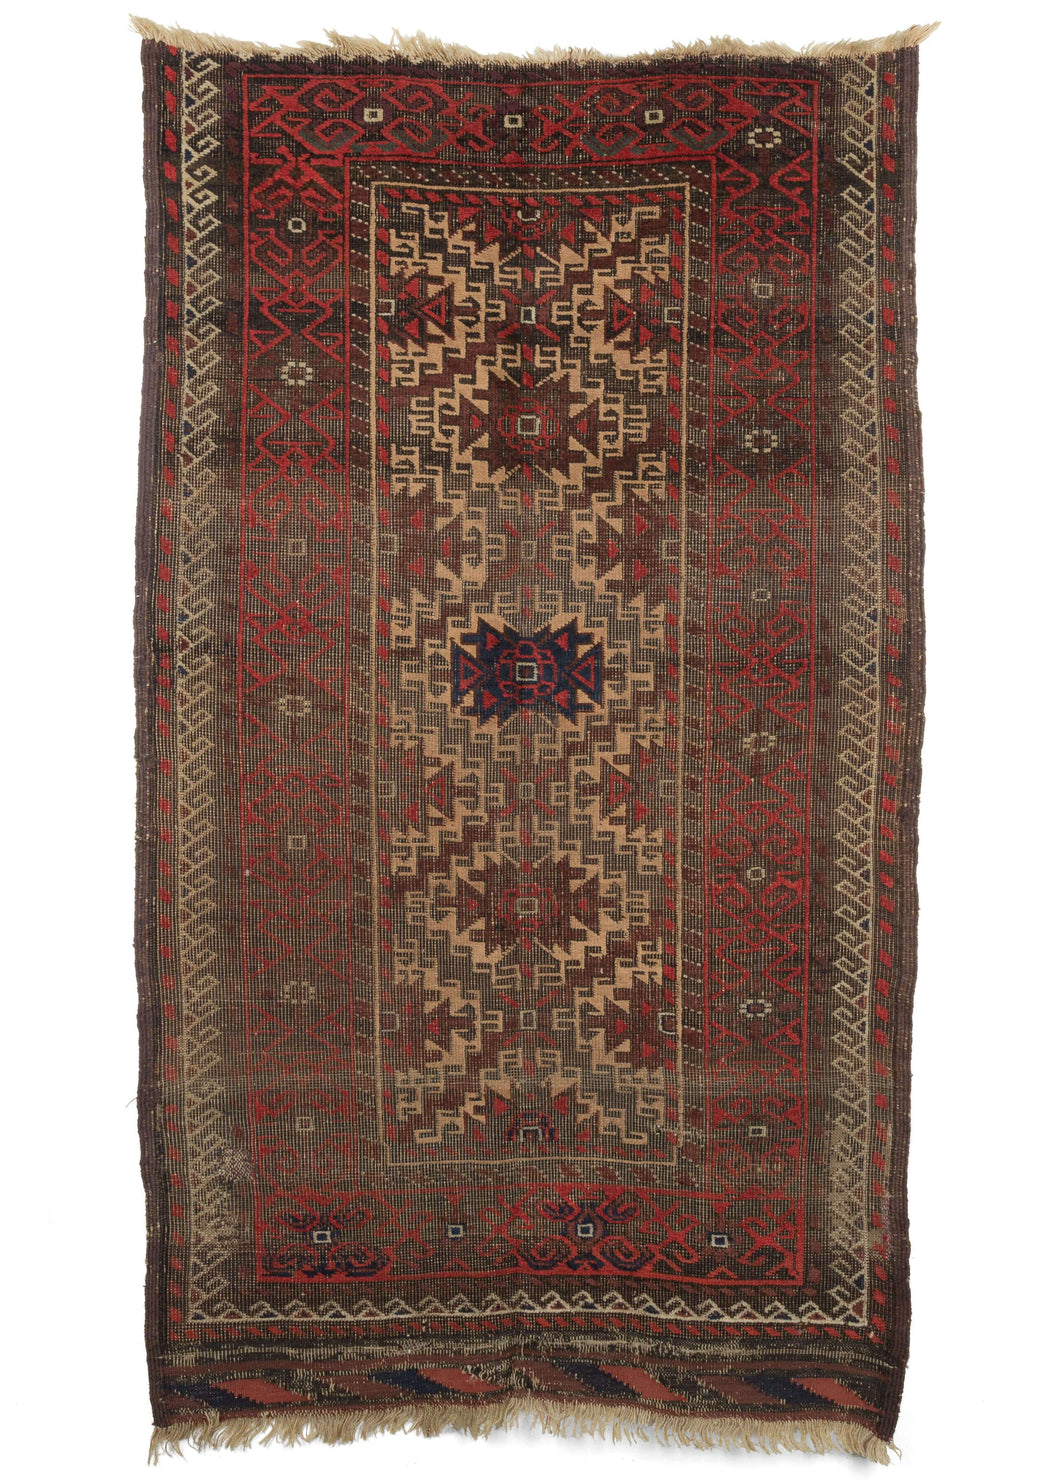 Antique Baluch scatter rug featuring madder red and aubergine dyed wool playinng nicely with soothing camel and oxidized browns, while a pop of indigo shines dead center and makes another appearance in the intact kilim edge. Both the warp and weft are constructed out of handspun wool. 